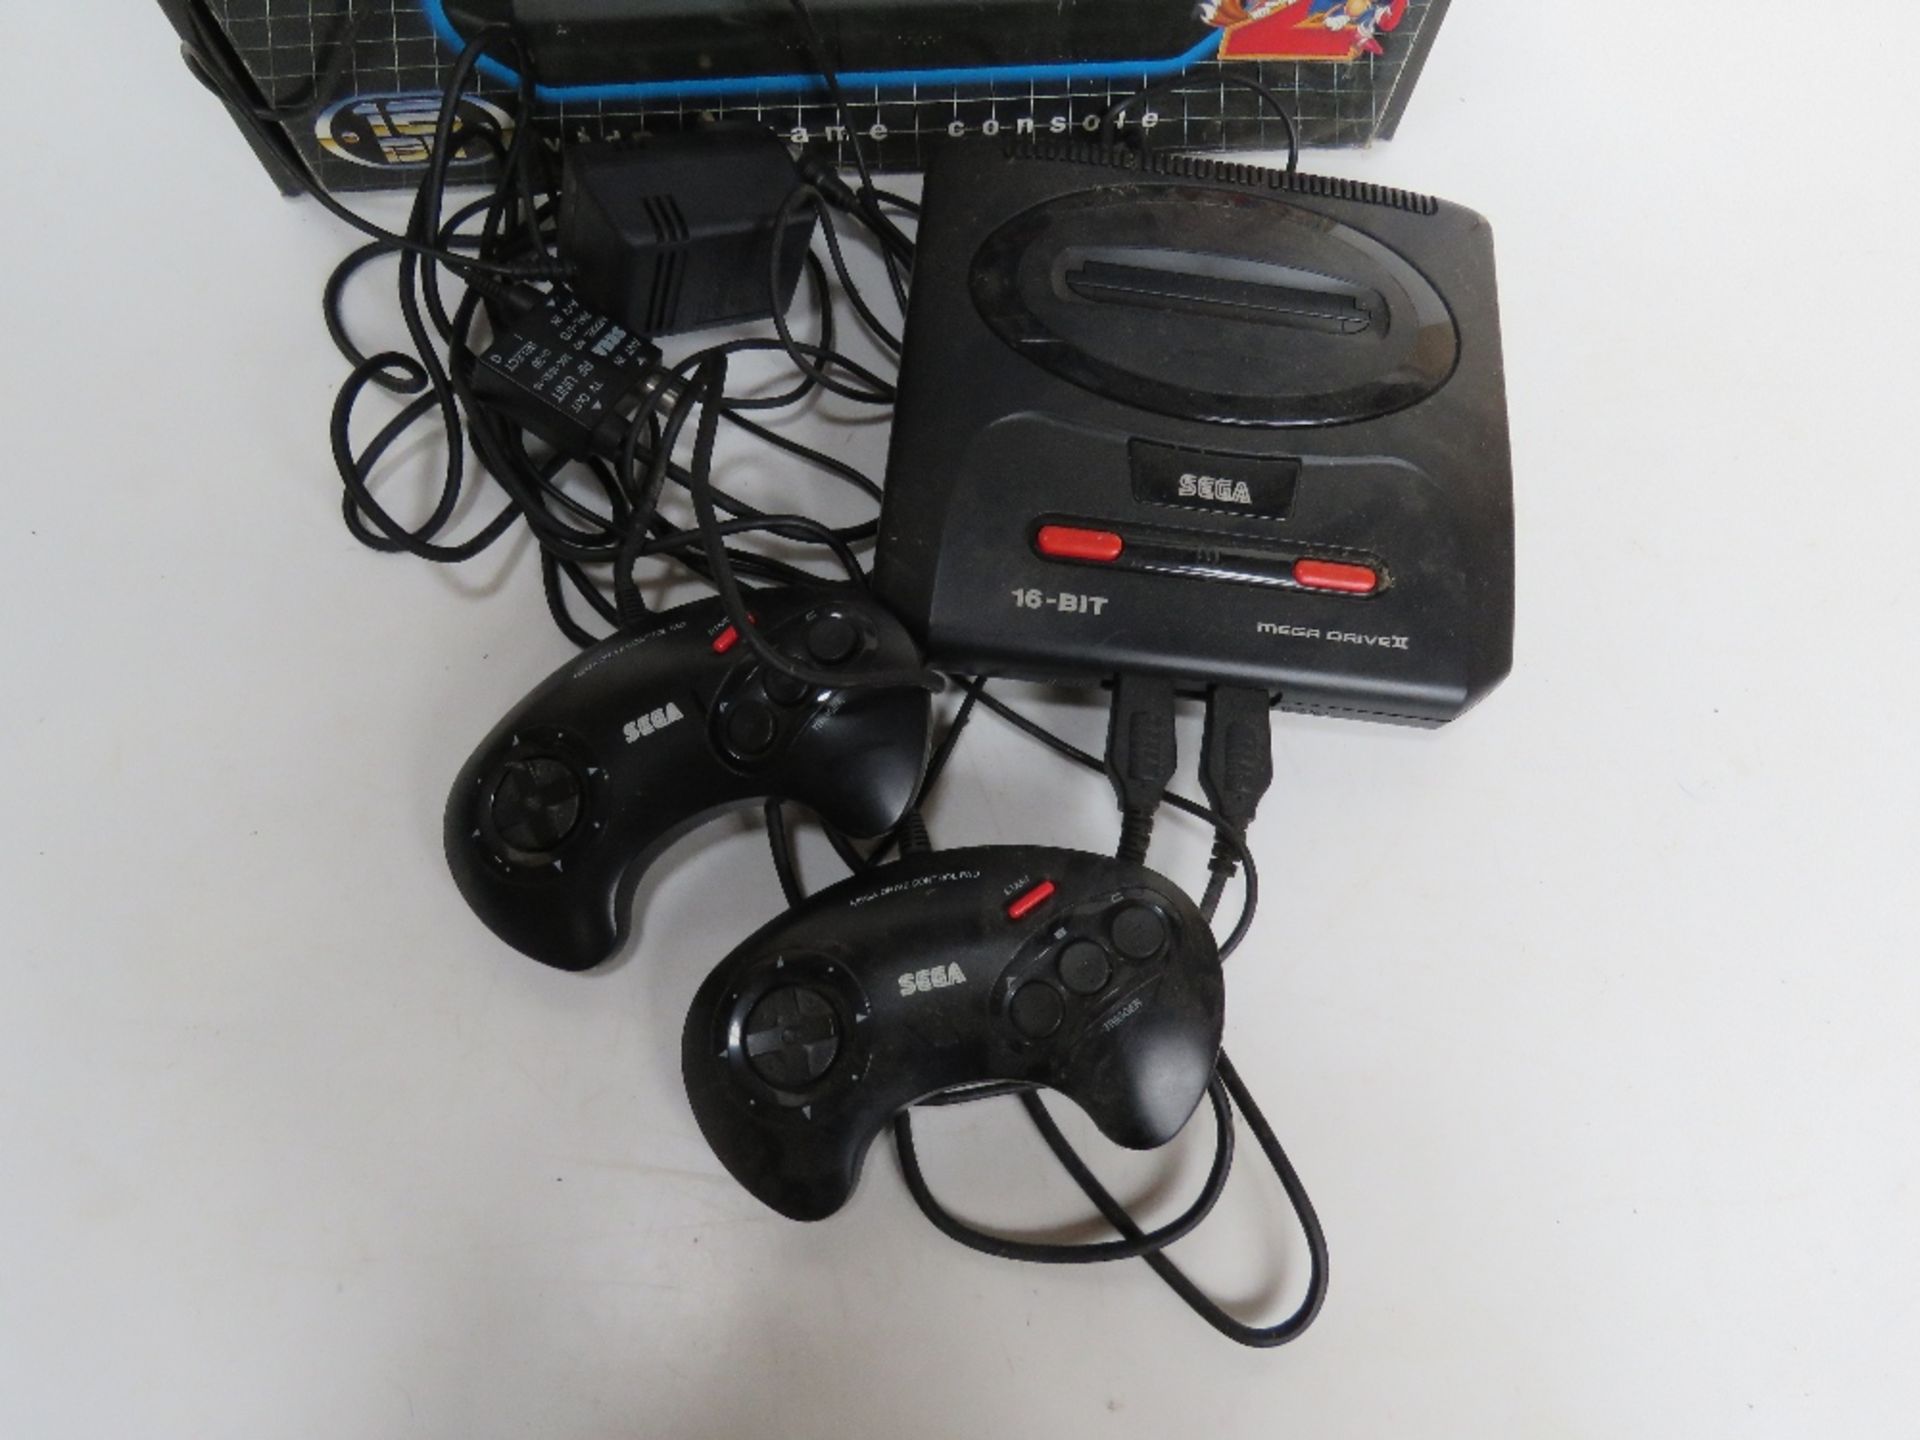 A Sega Mega Drive II console with controllers and cable in original box. - Image 2 of 4